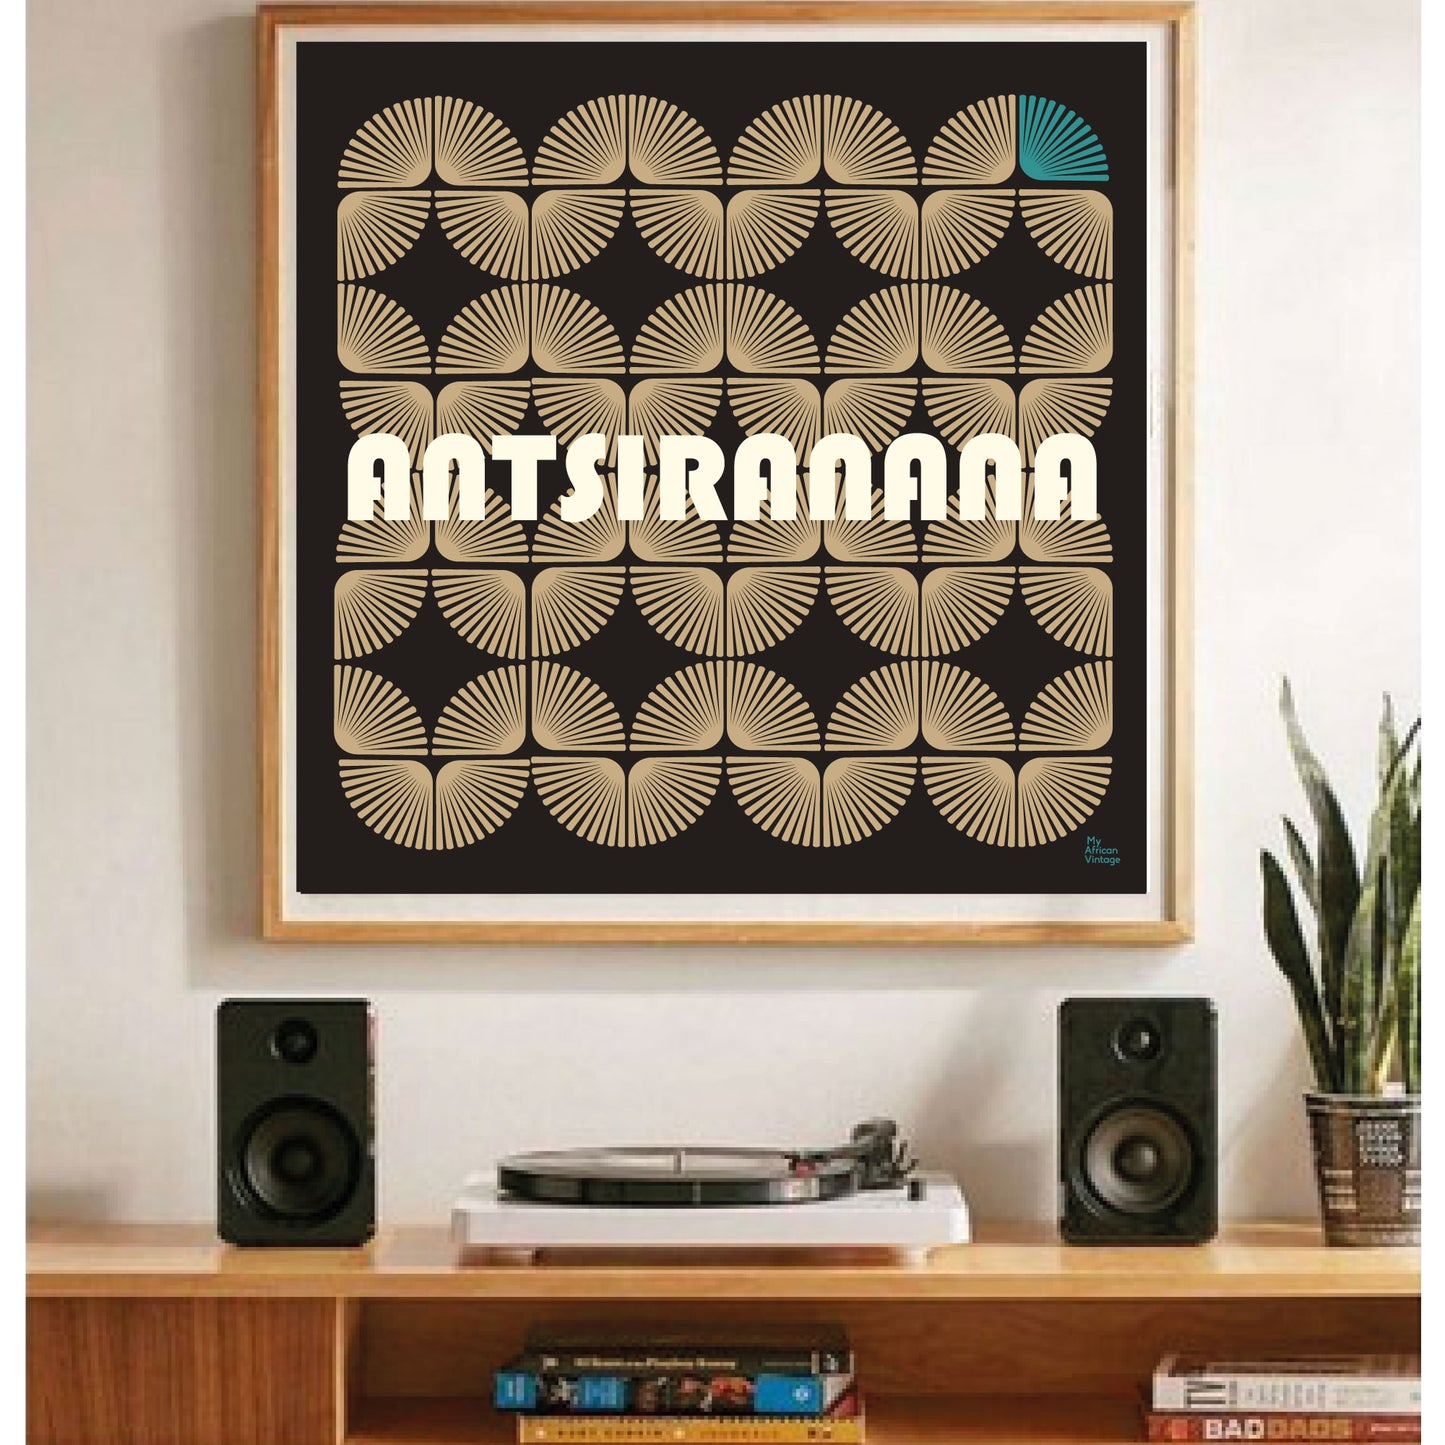 "Antsiranana" retro style poster - "My African Vintage" collection